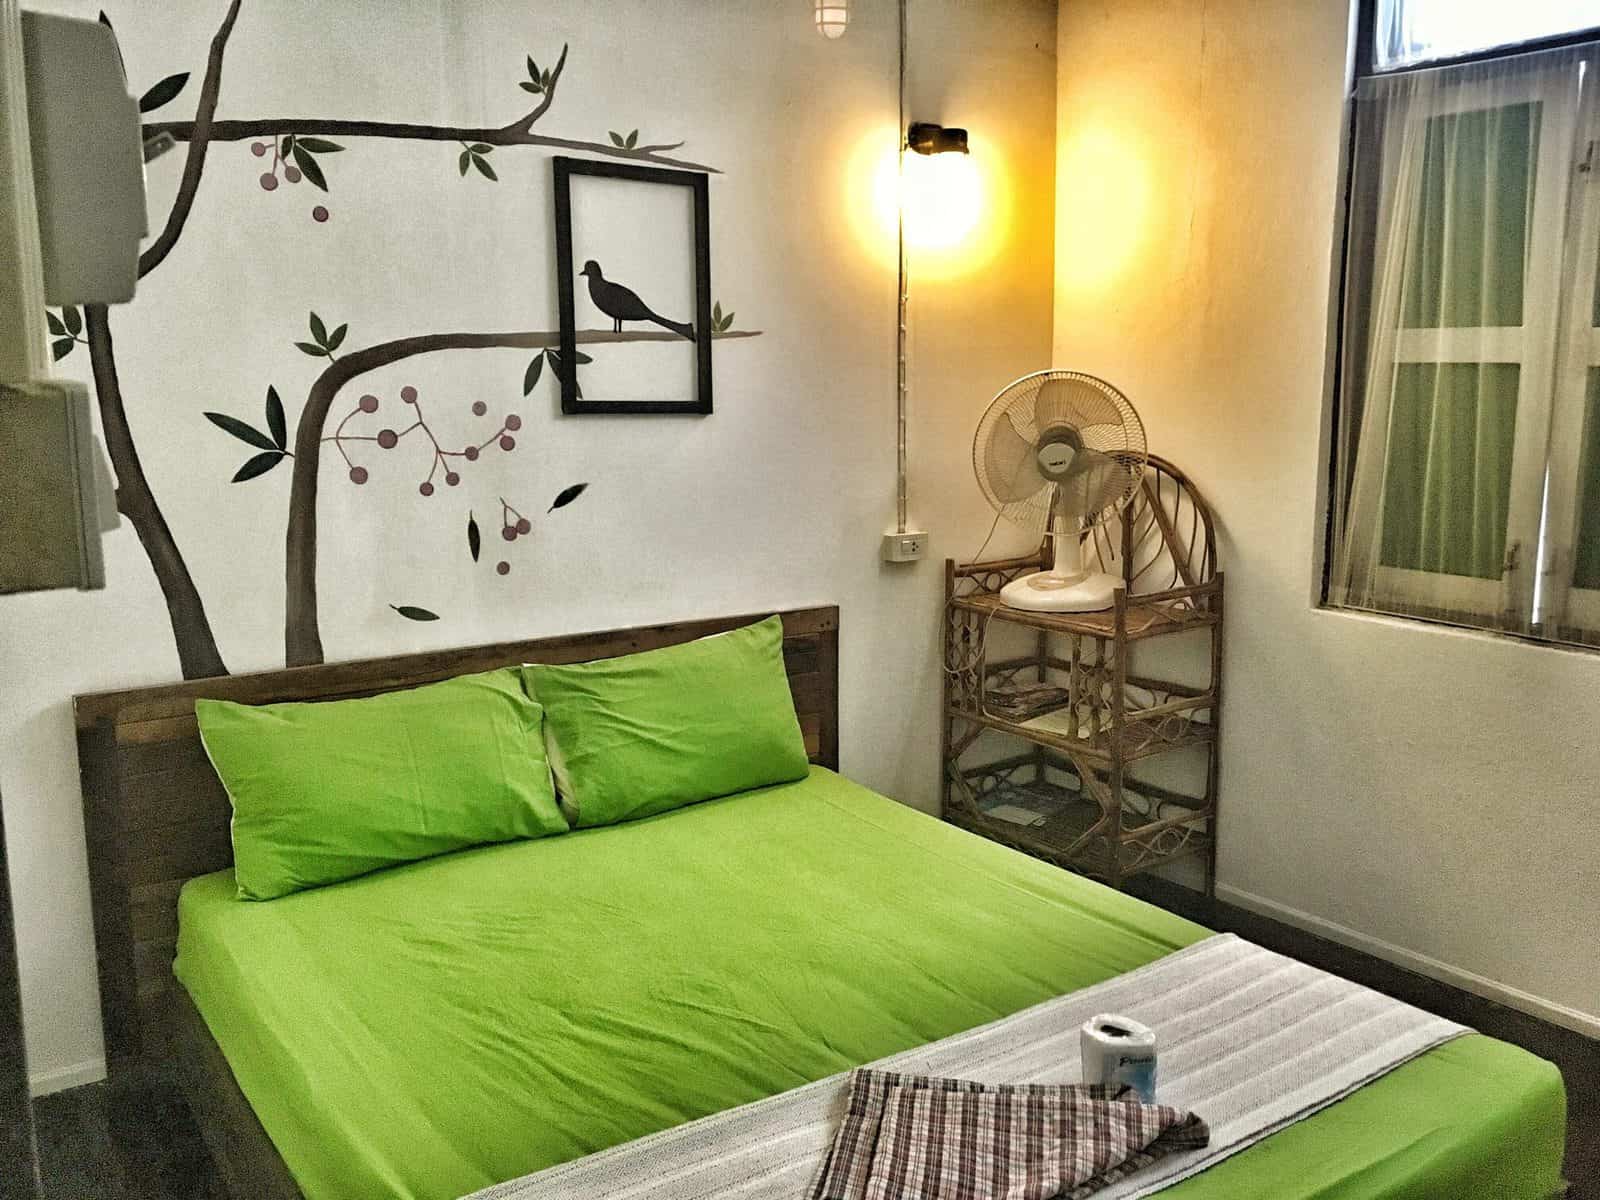 Cozy and comfortable rooms at Blue Juice Guesthouse.